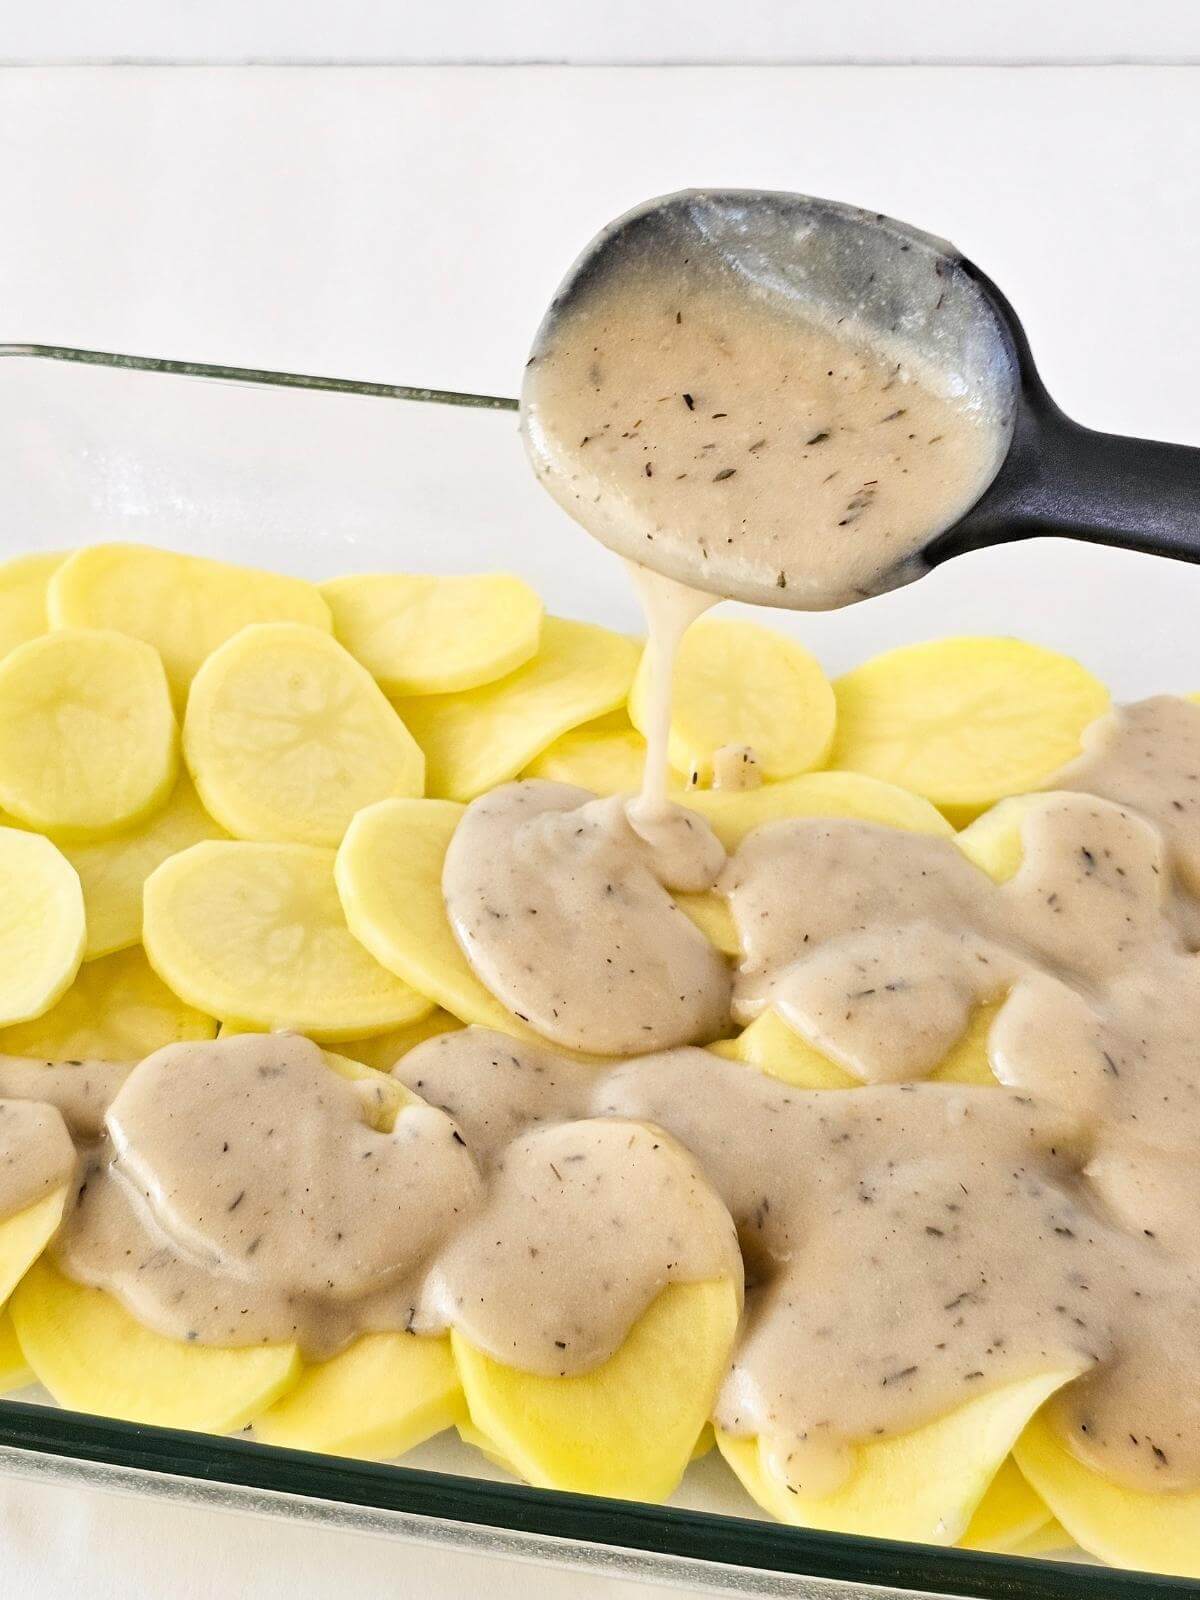 Cheese sauce being spooned onto sliced potatoes in a casserole dish.